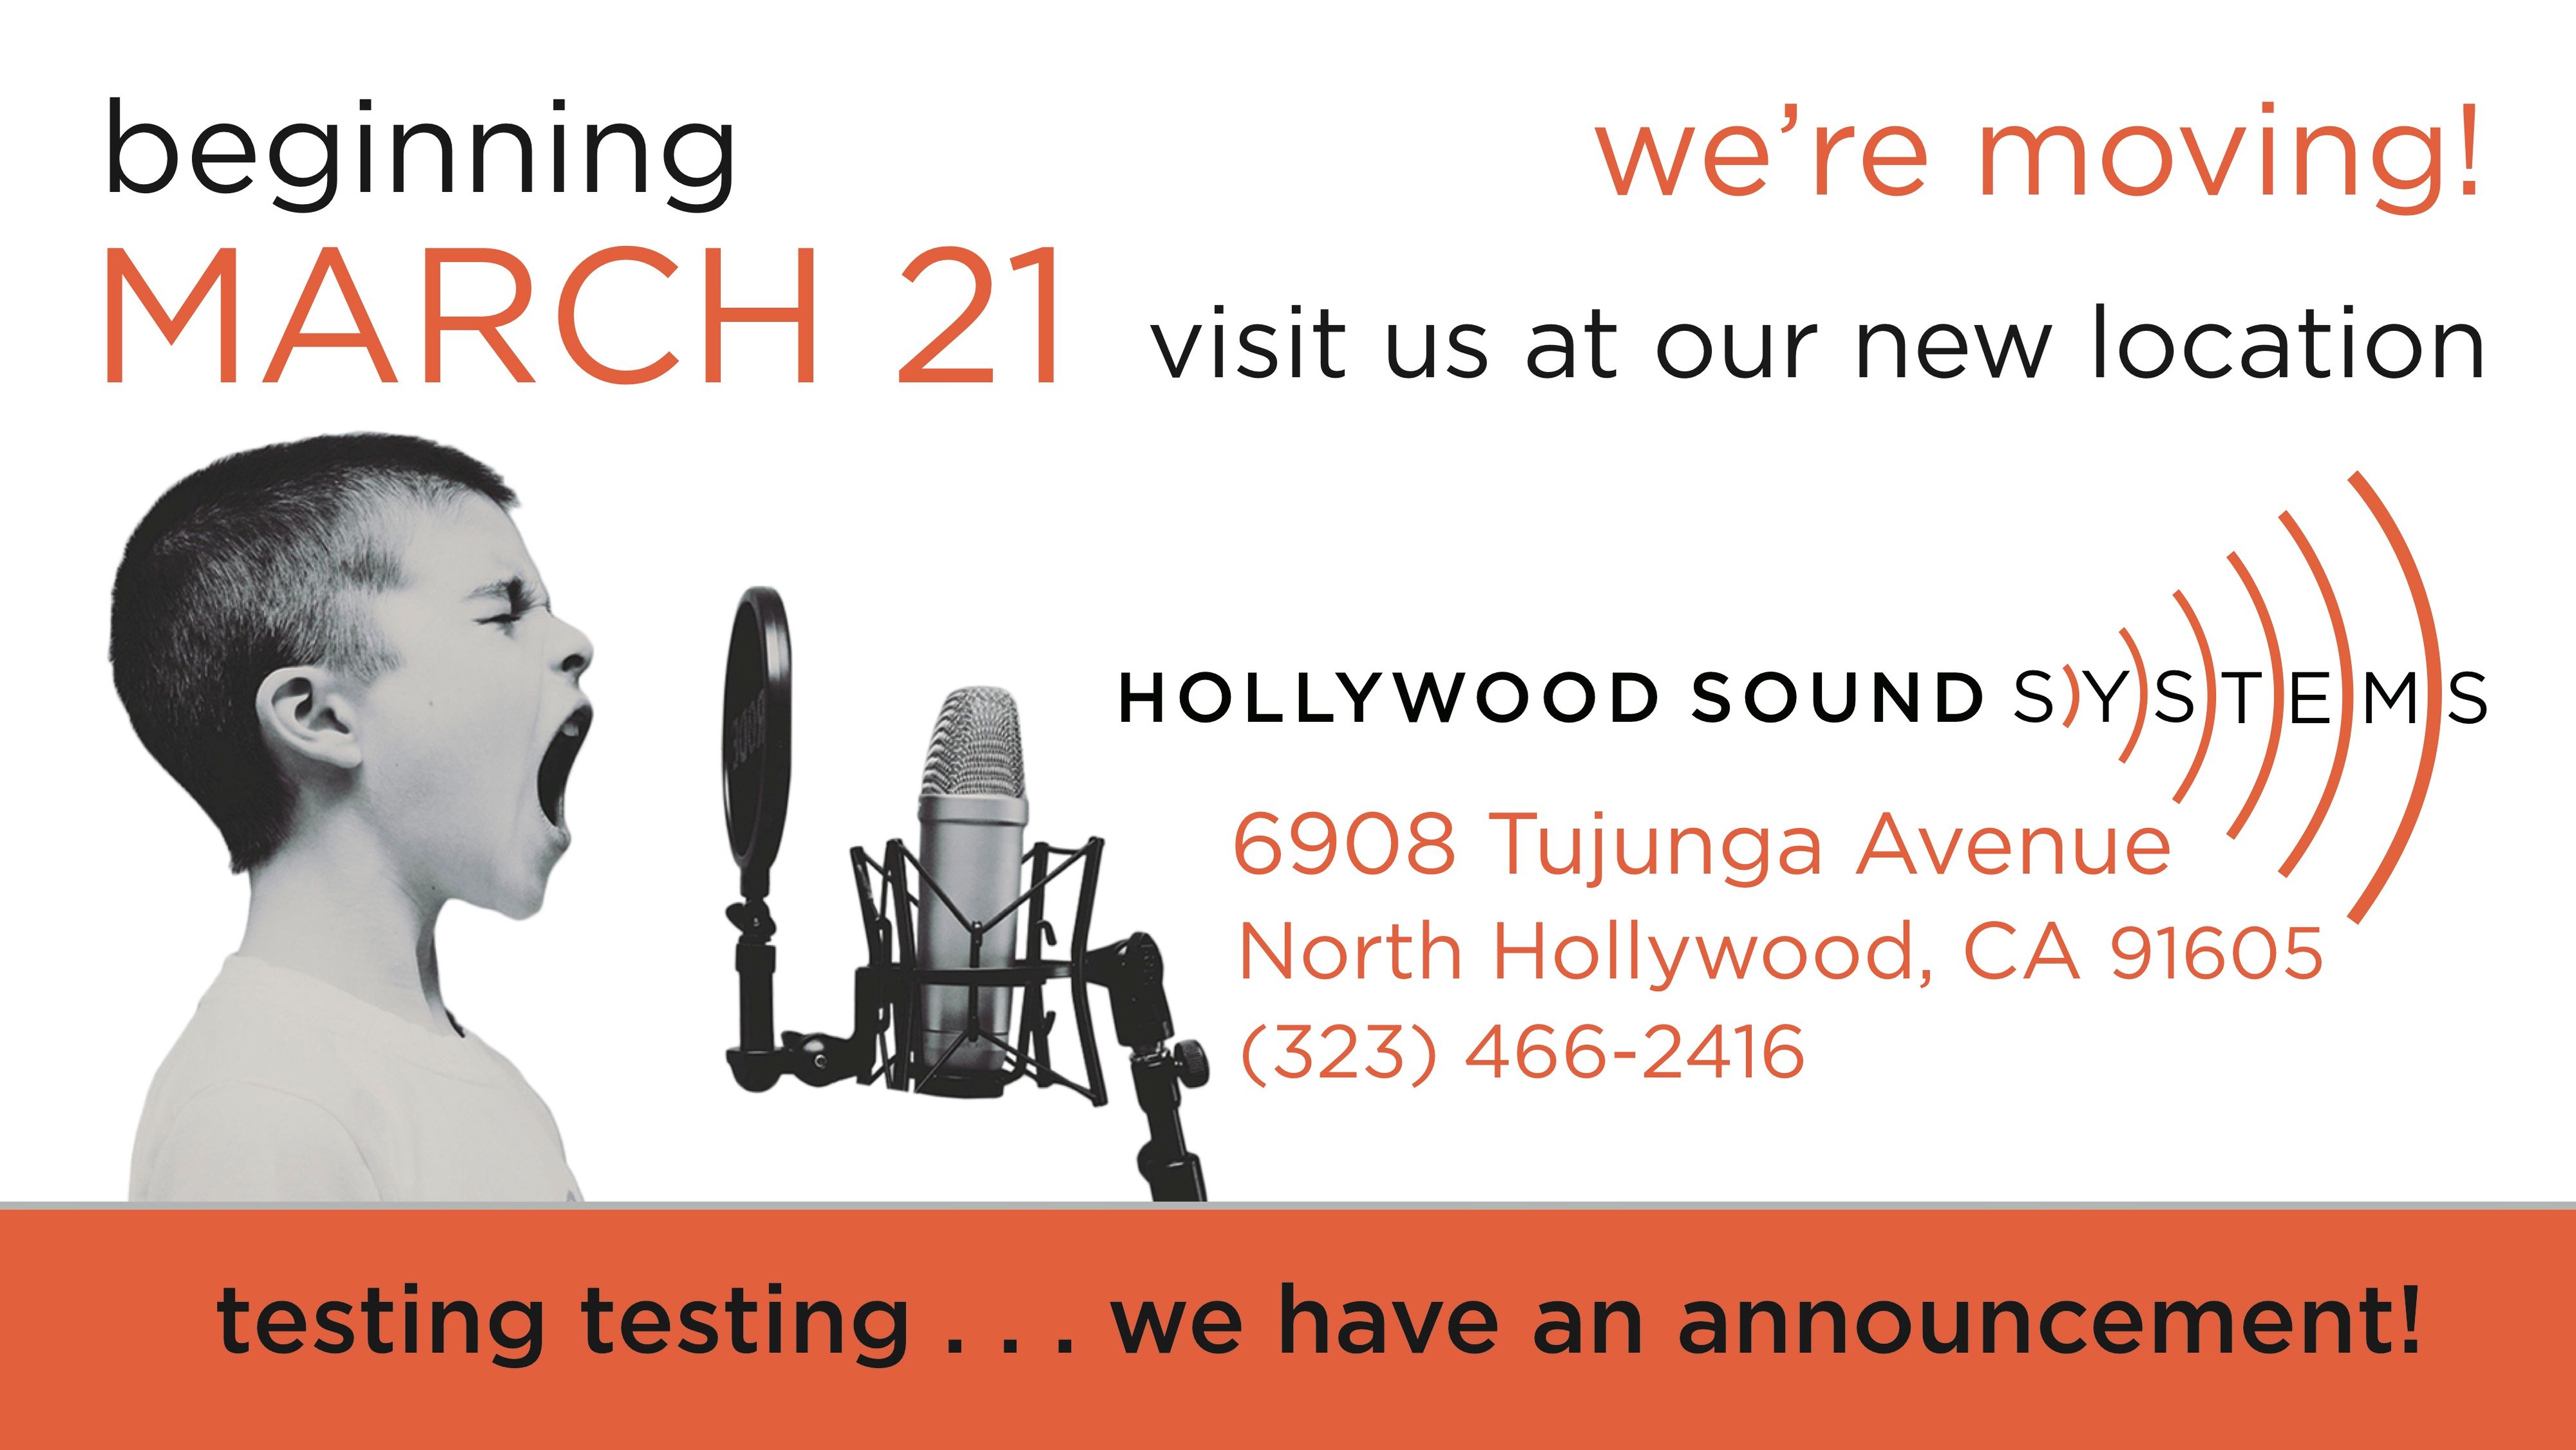 Hollywood Sound Systems is moving on March 21, 2020